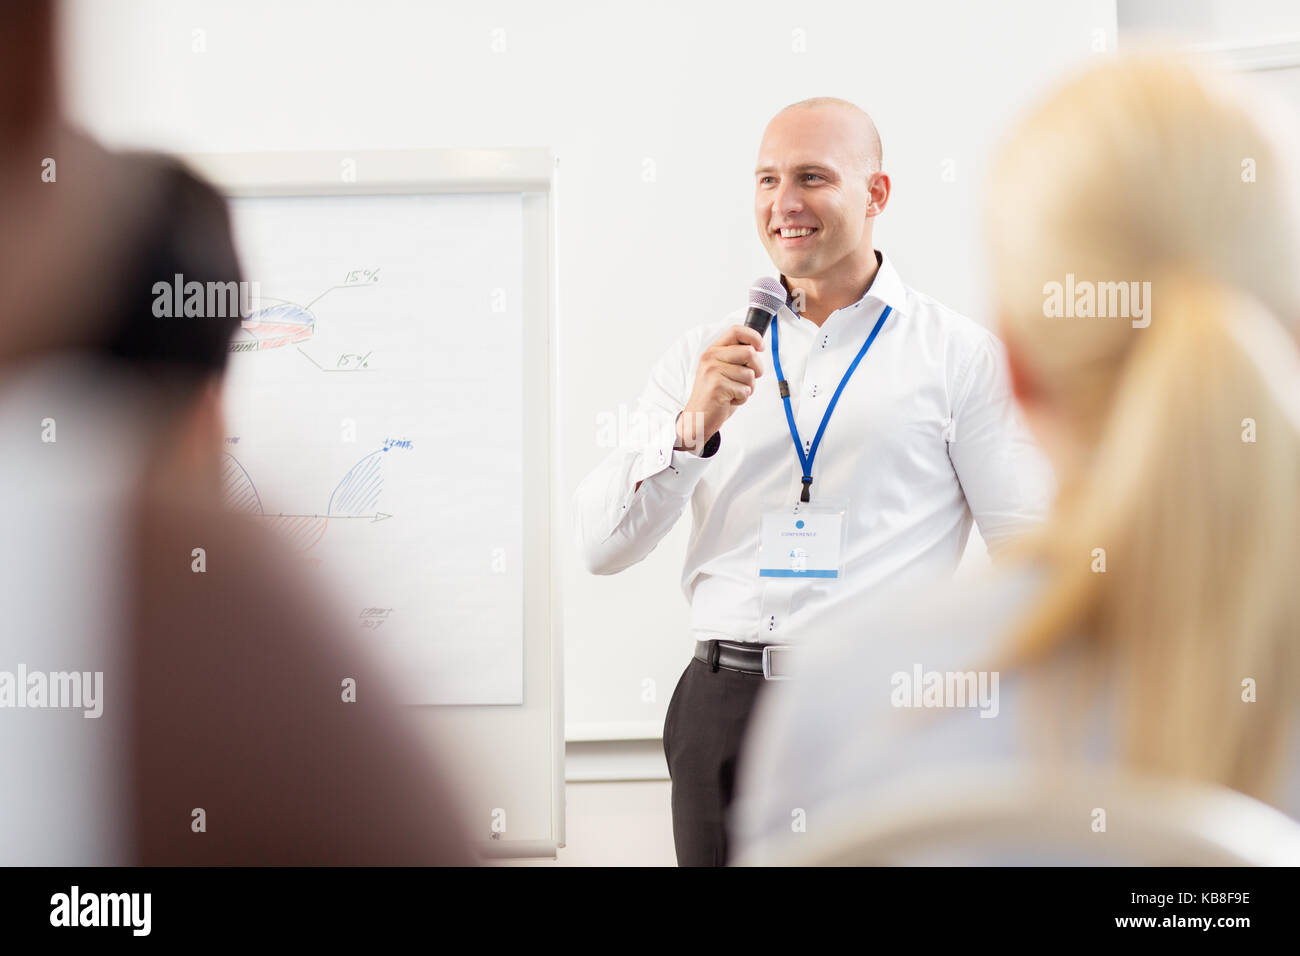 group of people at business conference  Stock Photo